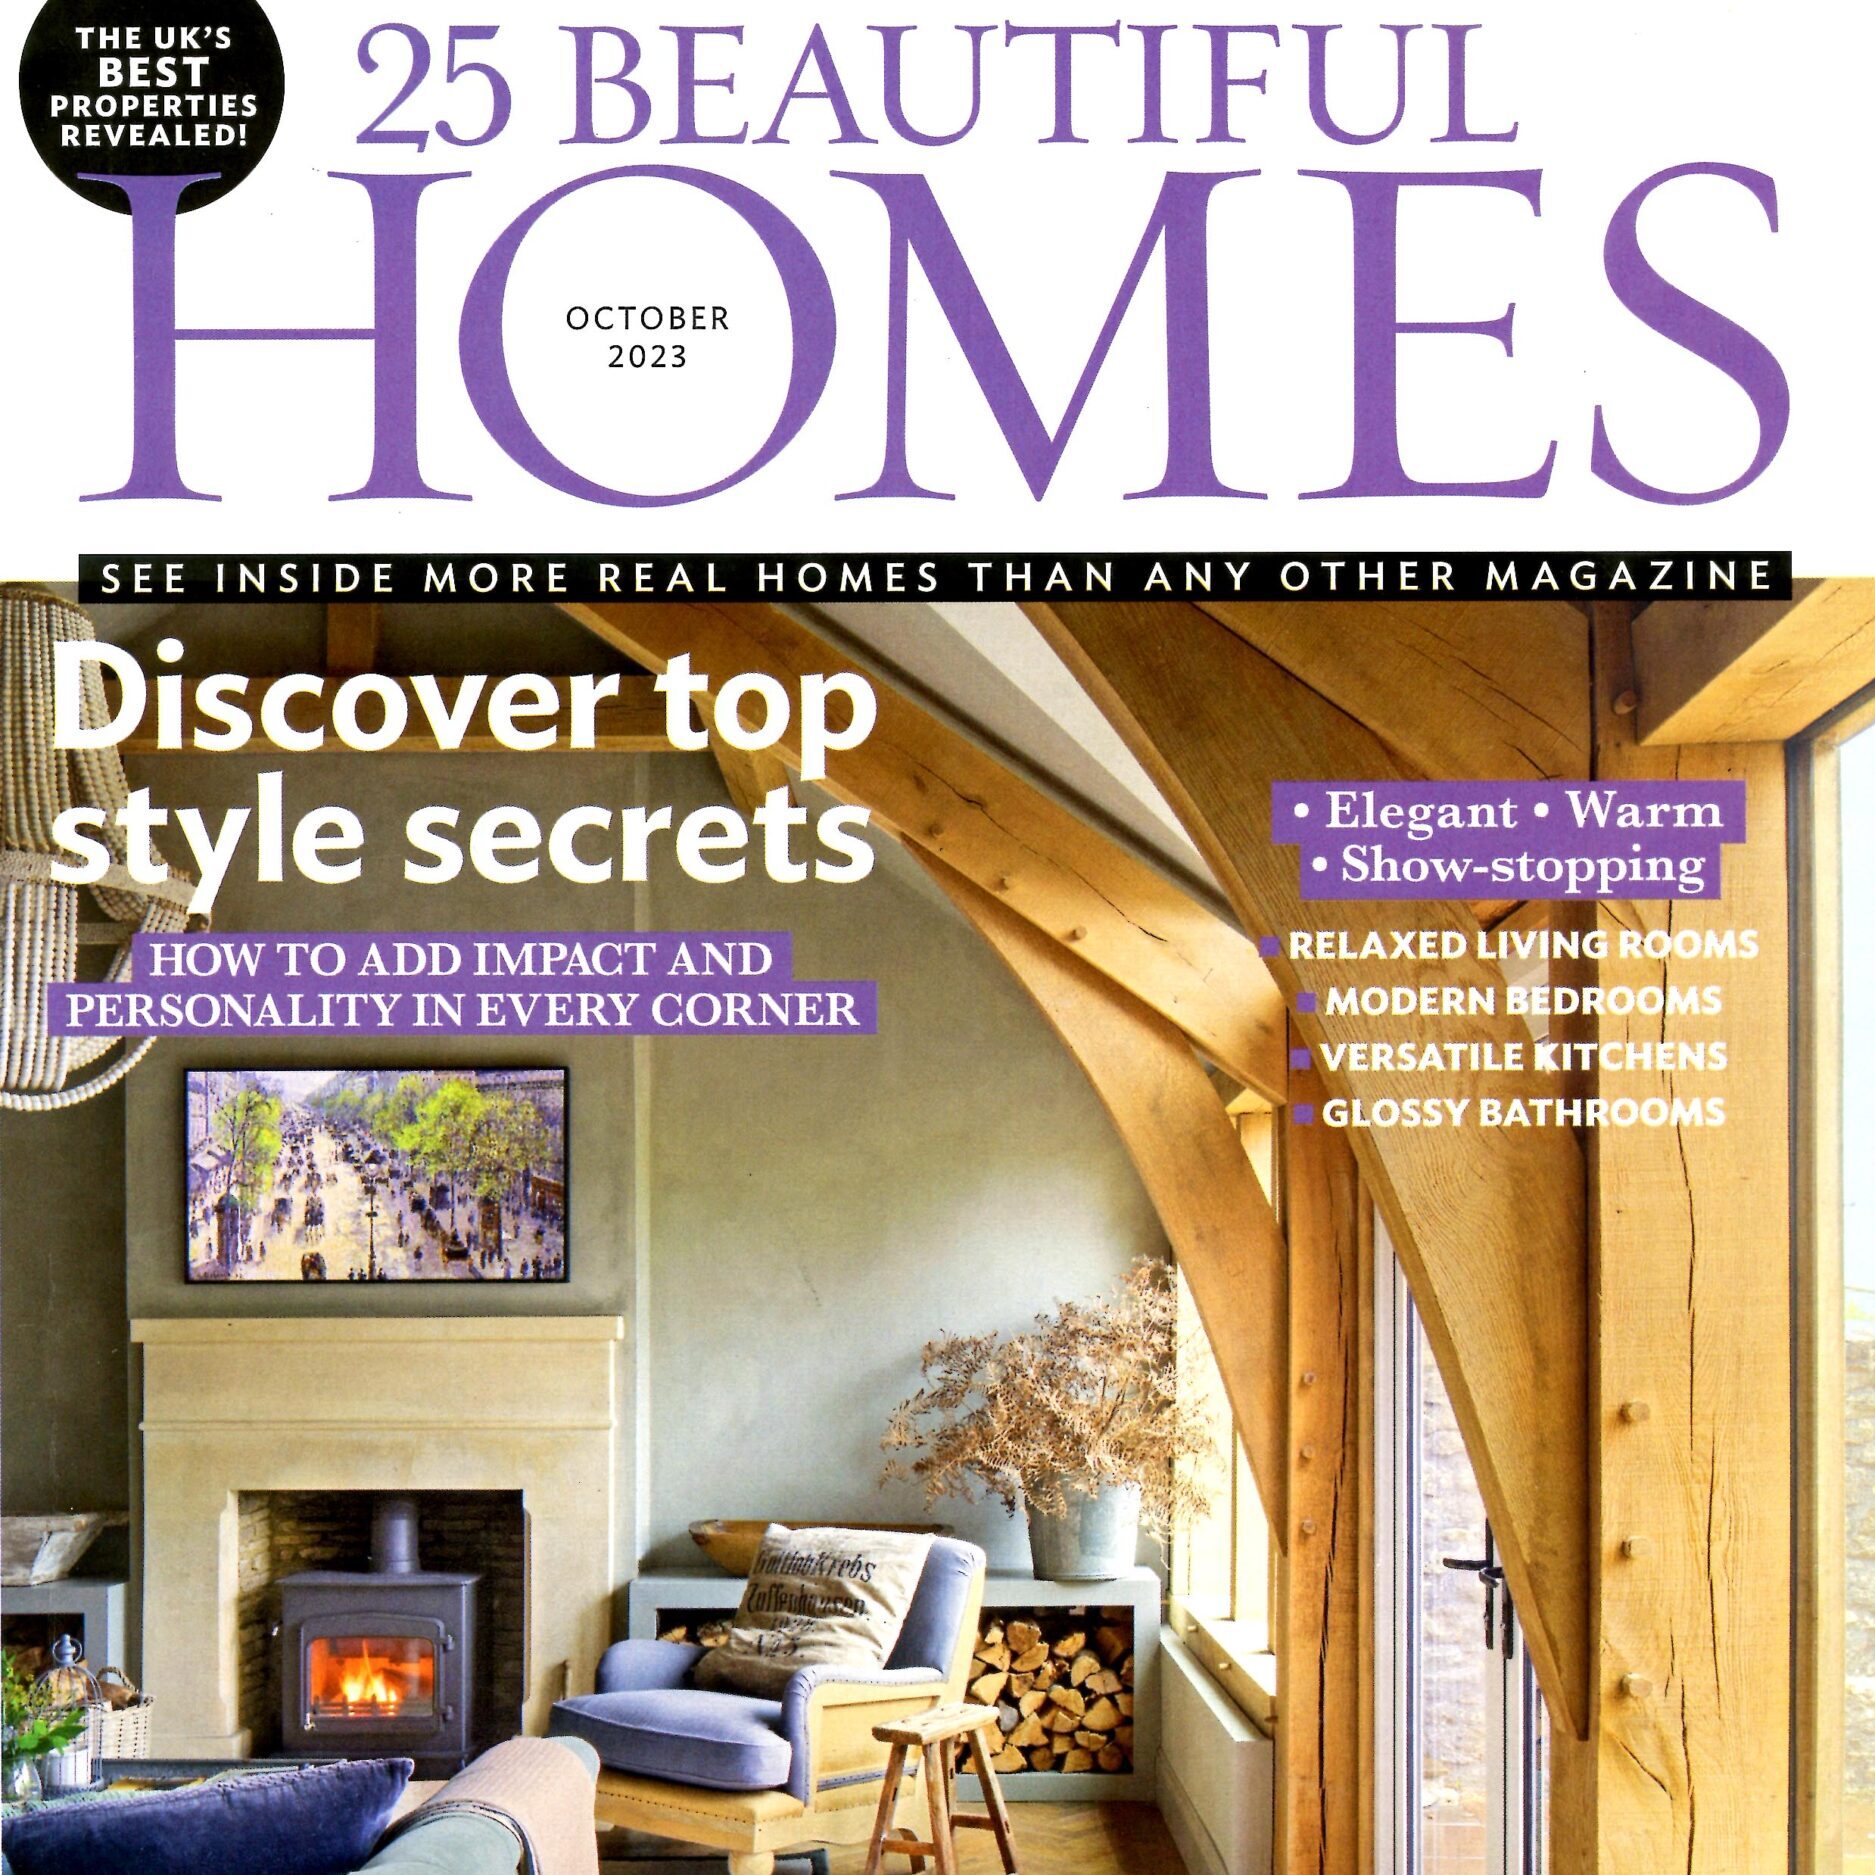 25 Beautiful Homes October 2023 1 Scaled E1694178161212 